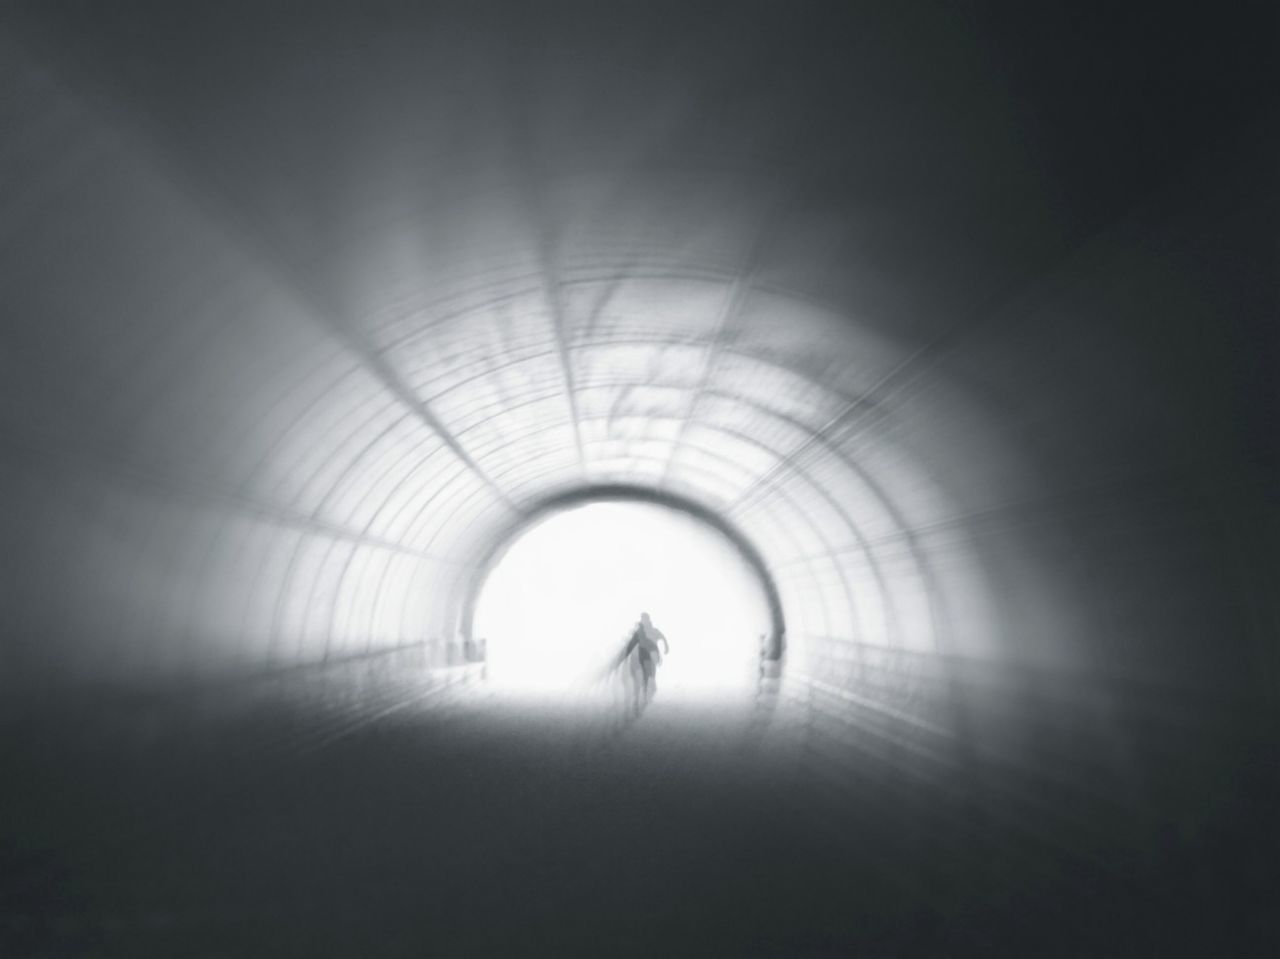 indoors, tunnel, walking, lifestyles, the way forward, full length, men, arch, leisure activity, rear view, ceiling, unrecognizable person, silhouette, diminishing perspective, person, built structure, light at the end of the tunnel, illuminated